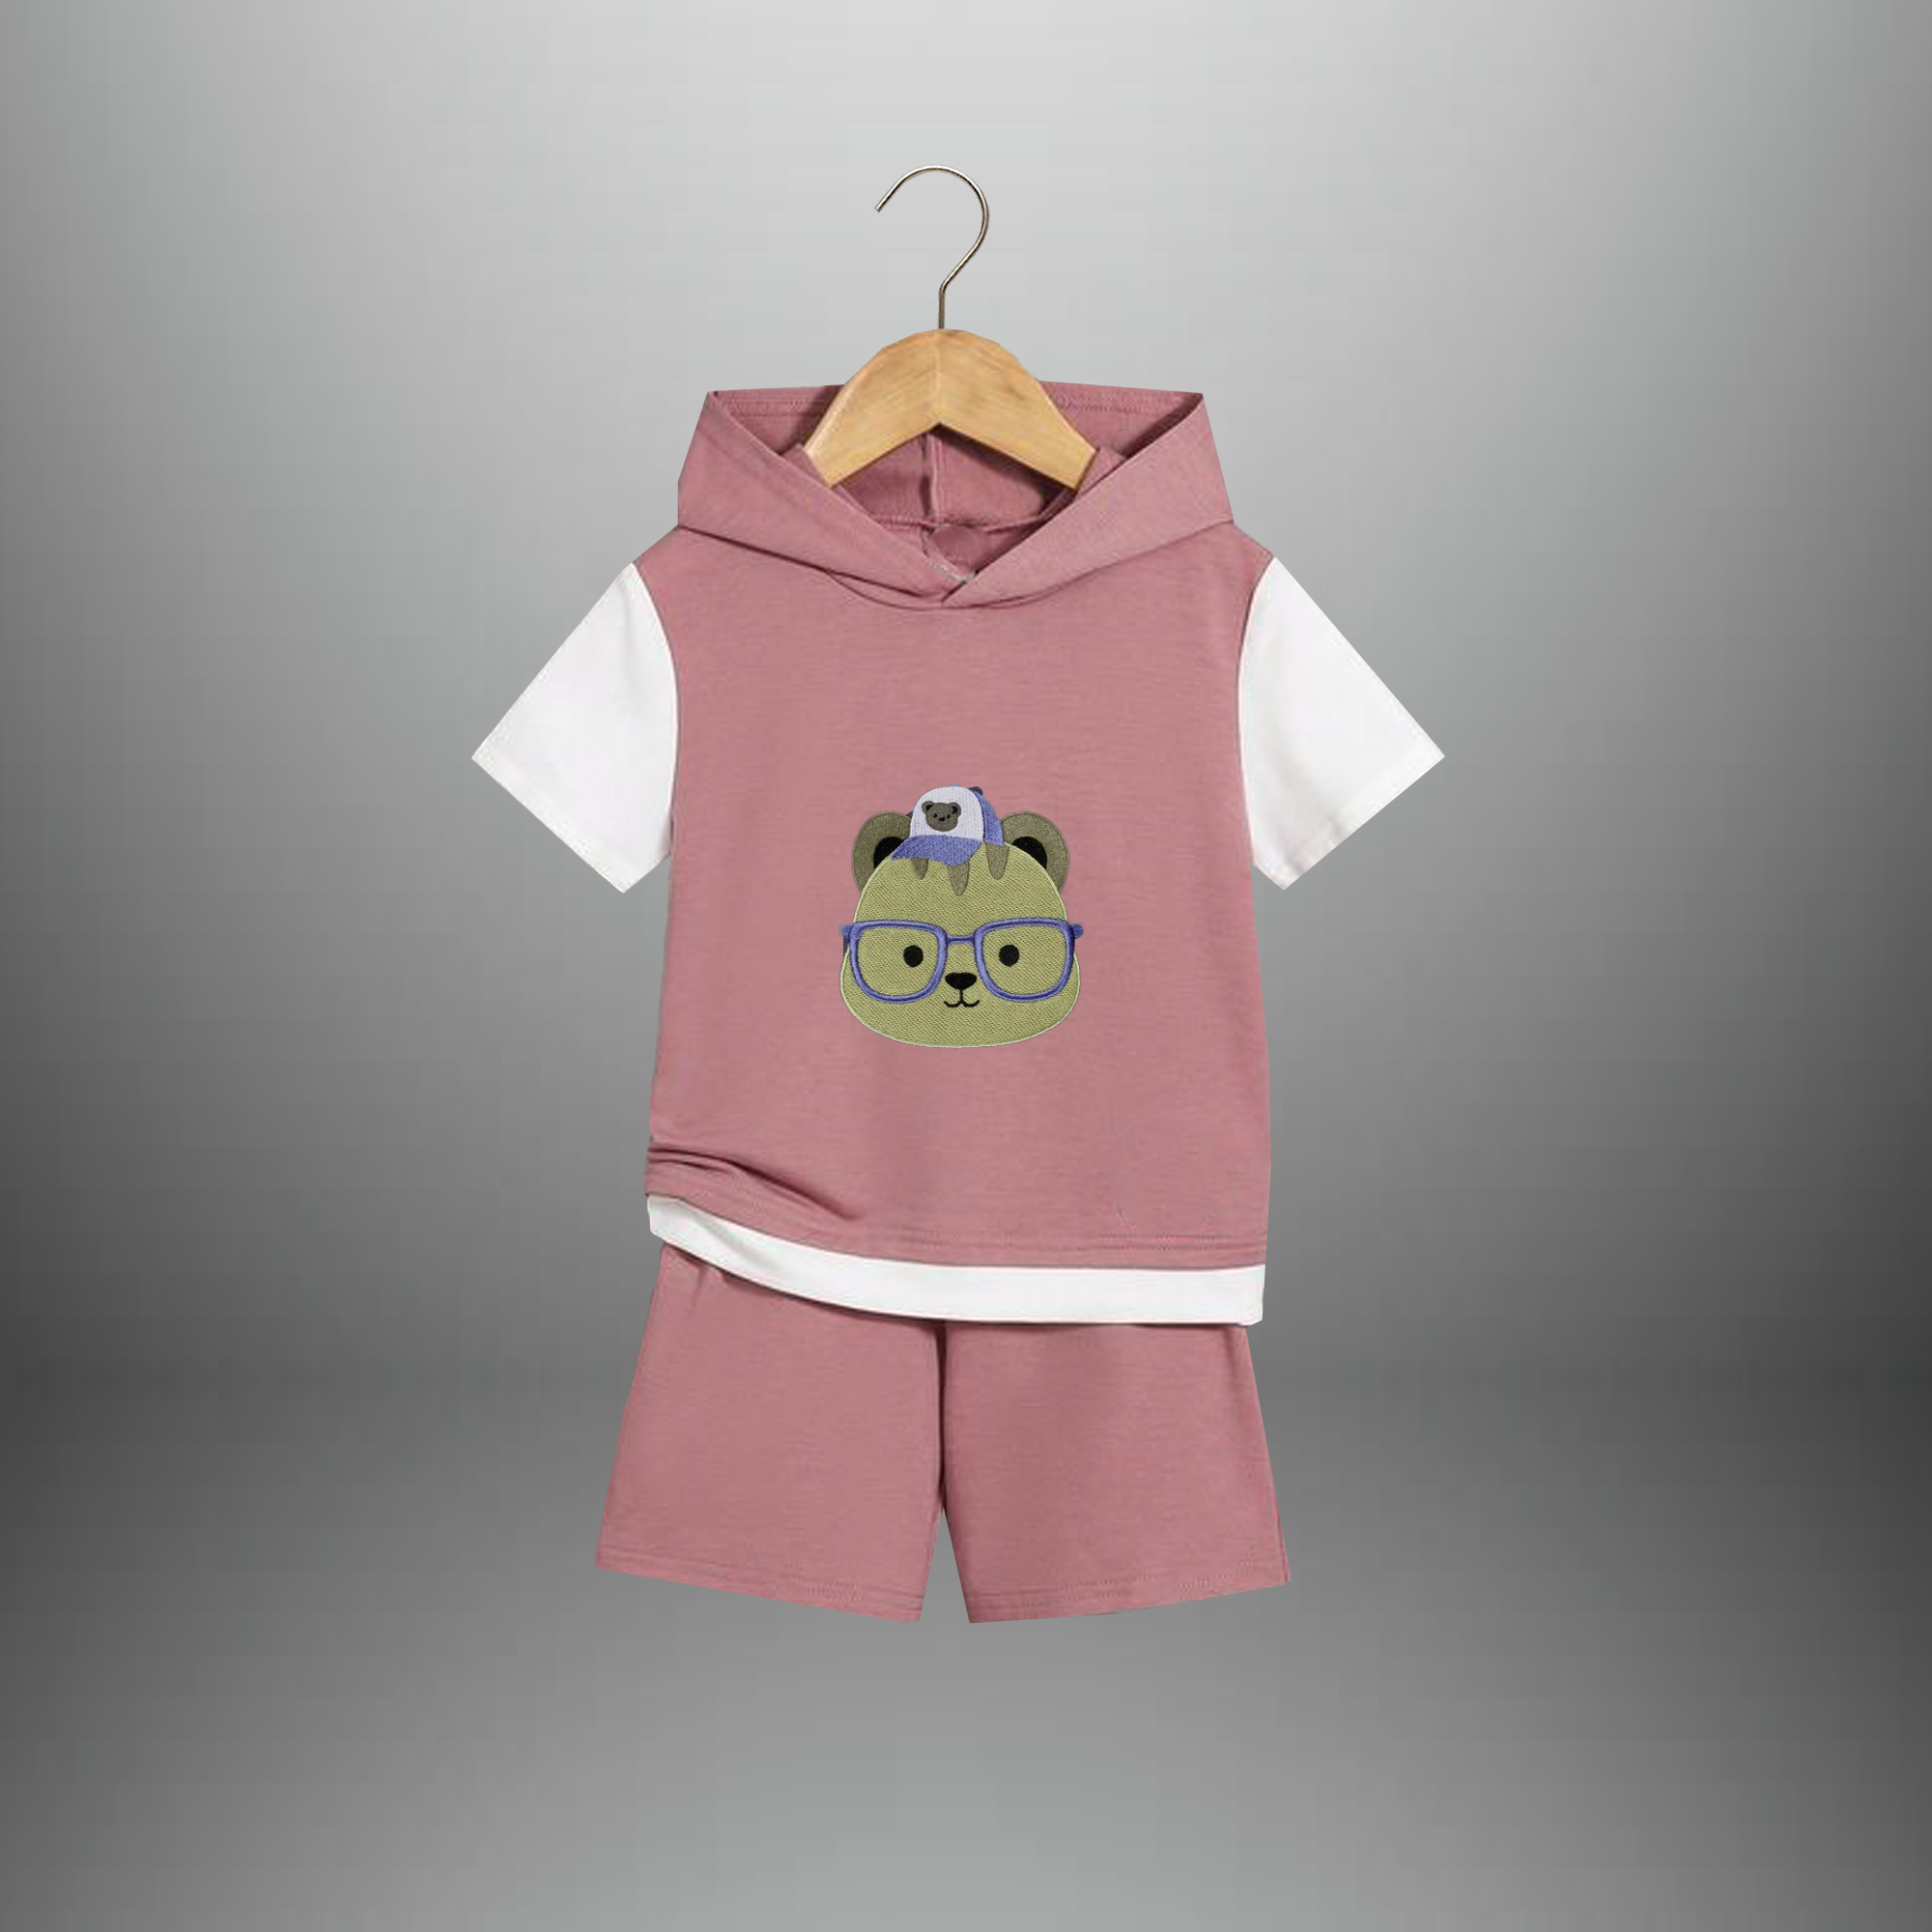 Boy's 2 piece set of Nude Pink shorts and Color blocked Hooded T-shirt -RKFCW541